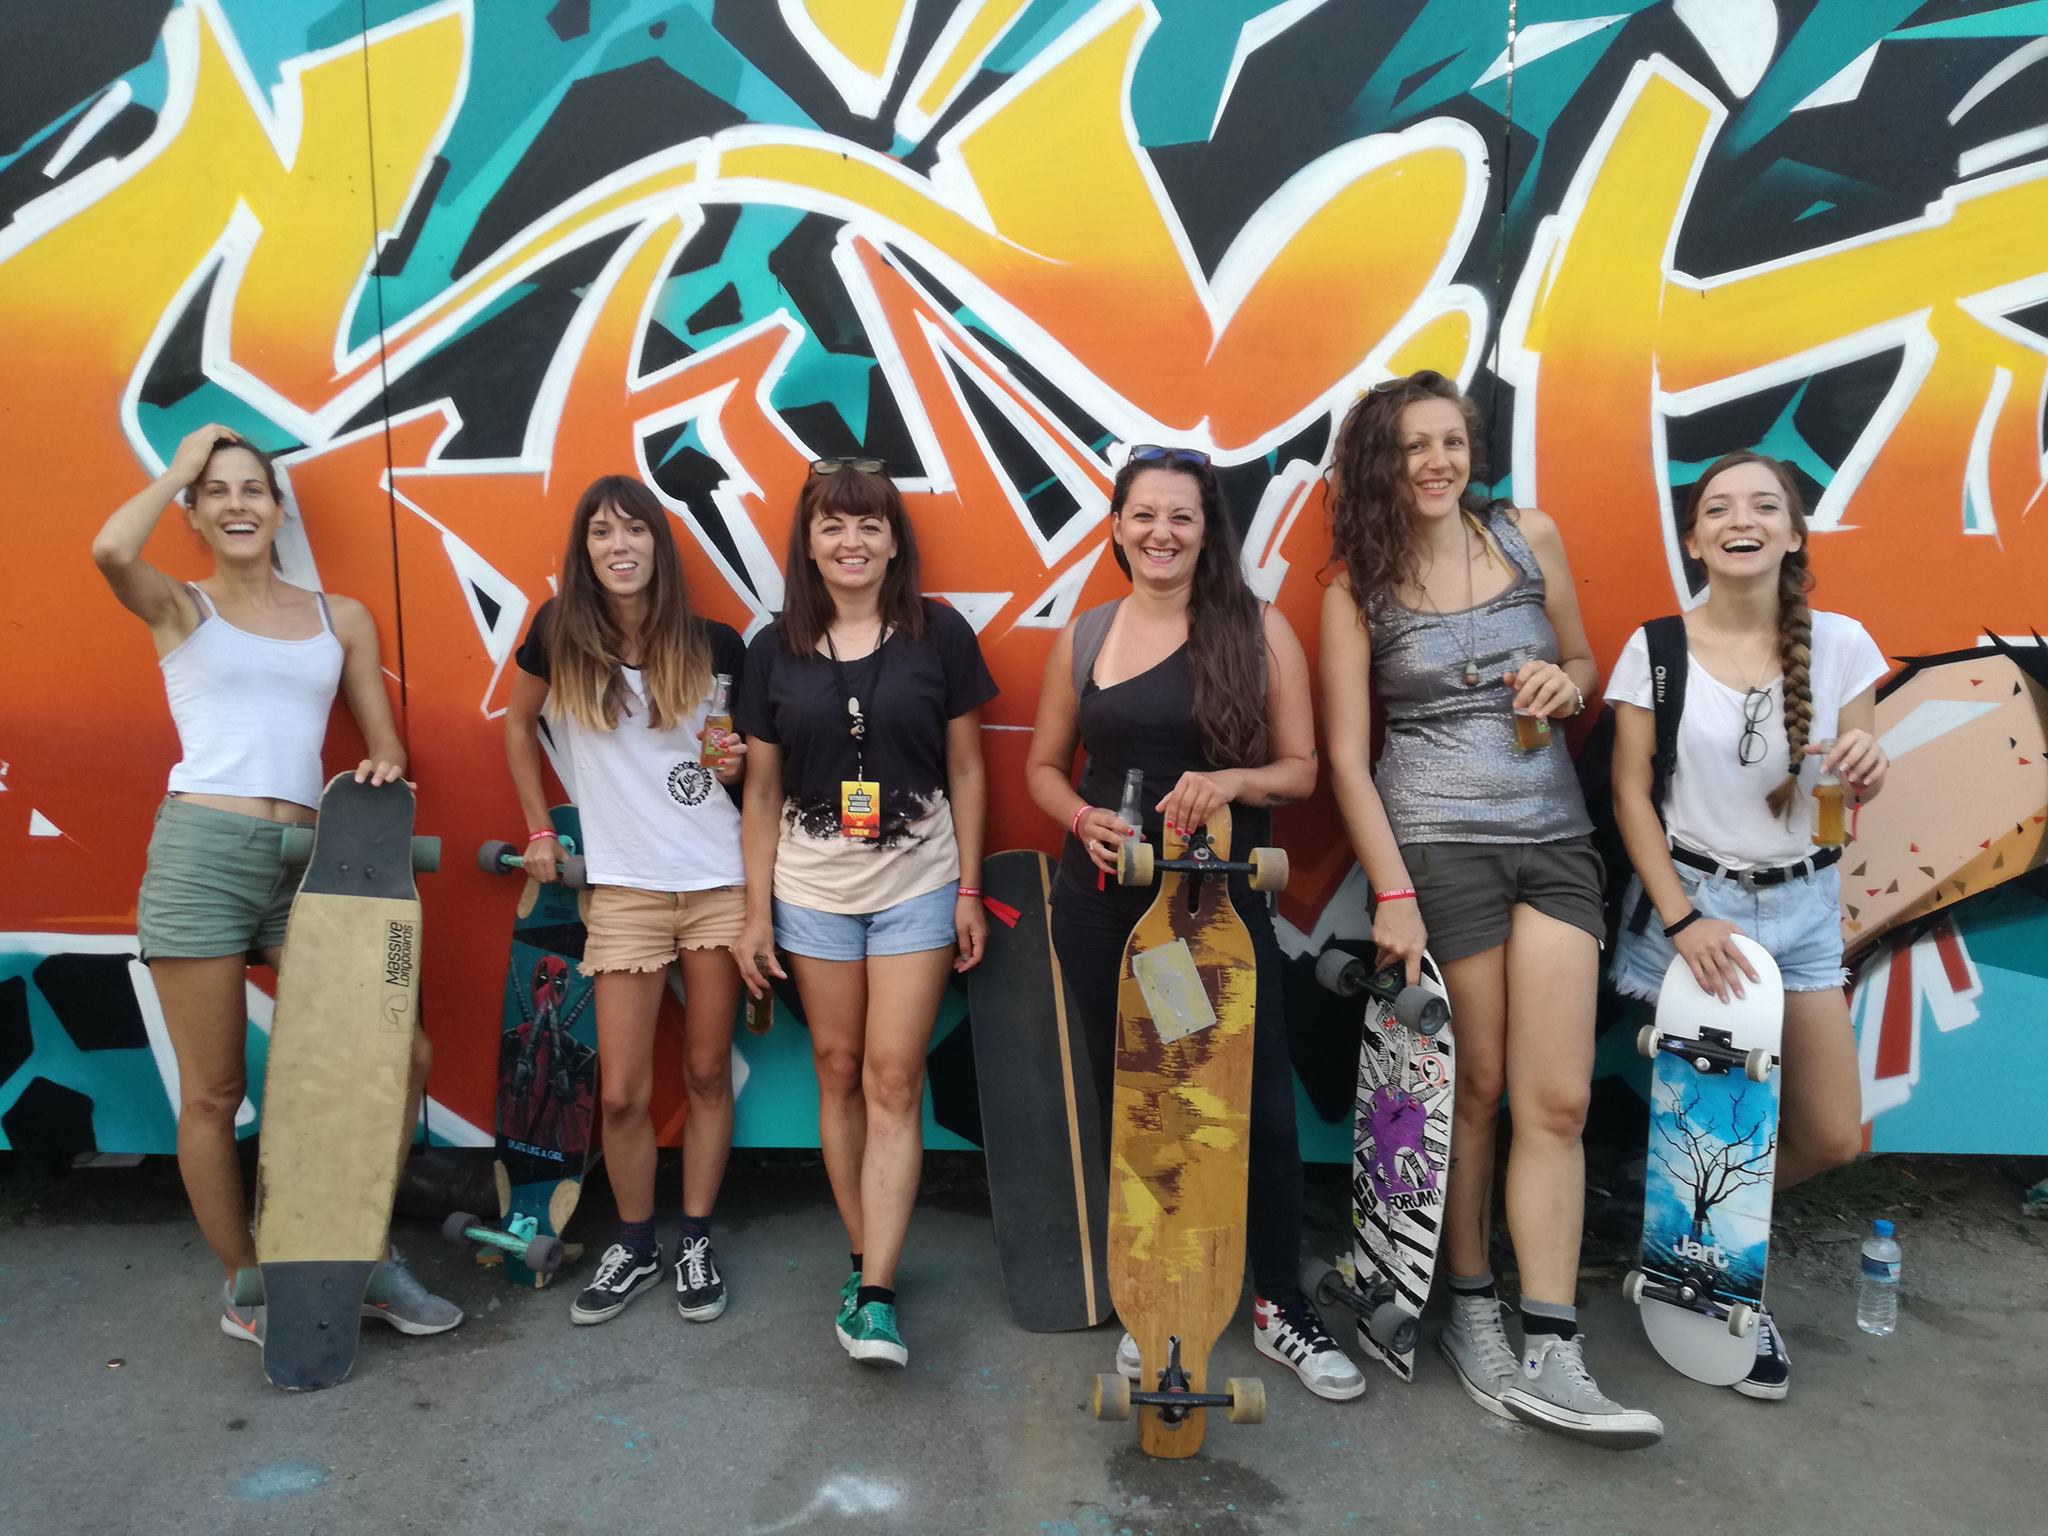 longboard girls crew, longboard, longboarding, skate, skateboarding, cool, rad, strong, awesome, photo, girl, power, sea, summer, amazing photo, nose manual, girls who shred, girls who skate, lgc, friends, fun, skate like a girl, women supporting women, goals, beautiful, action, action sports, sport, women in sport, game changers, ride, female rider, athlete, girl boss, lean in, women unite, equality, balance, gender, gender equality, board, boards, sun, longboard girl, longboard girls, boards, skater girl, skater girls, fashion, love, freeride, downhill, dancing, friendship, friends, be the change, work for change, greece, longboard girls crew greece, longboard girl greece, freestyle, freeride, downhill, slalom, maria Eleftheriadou